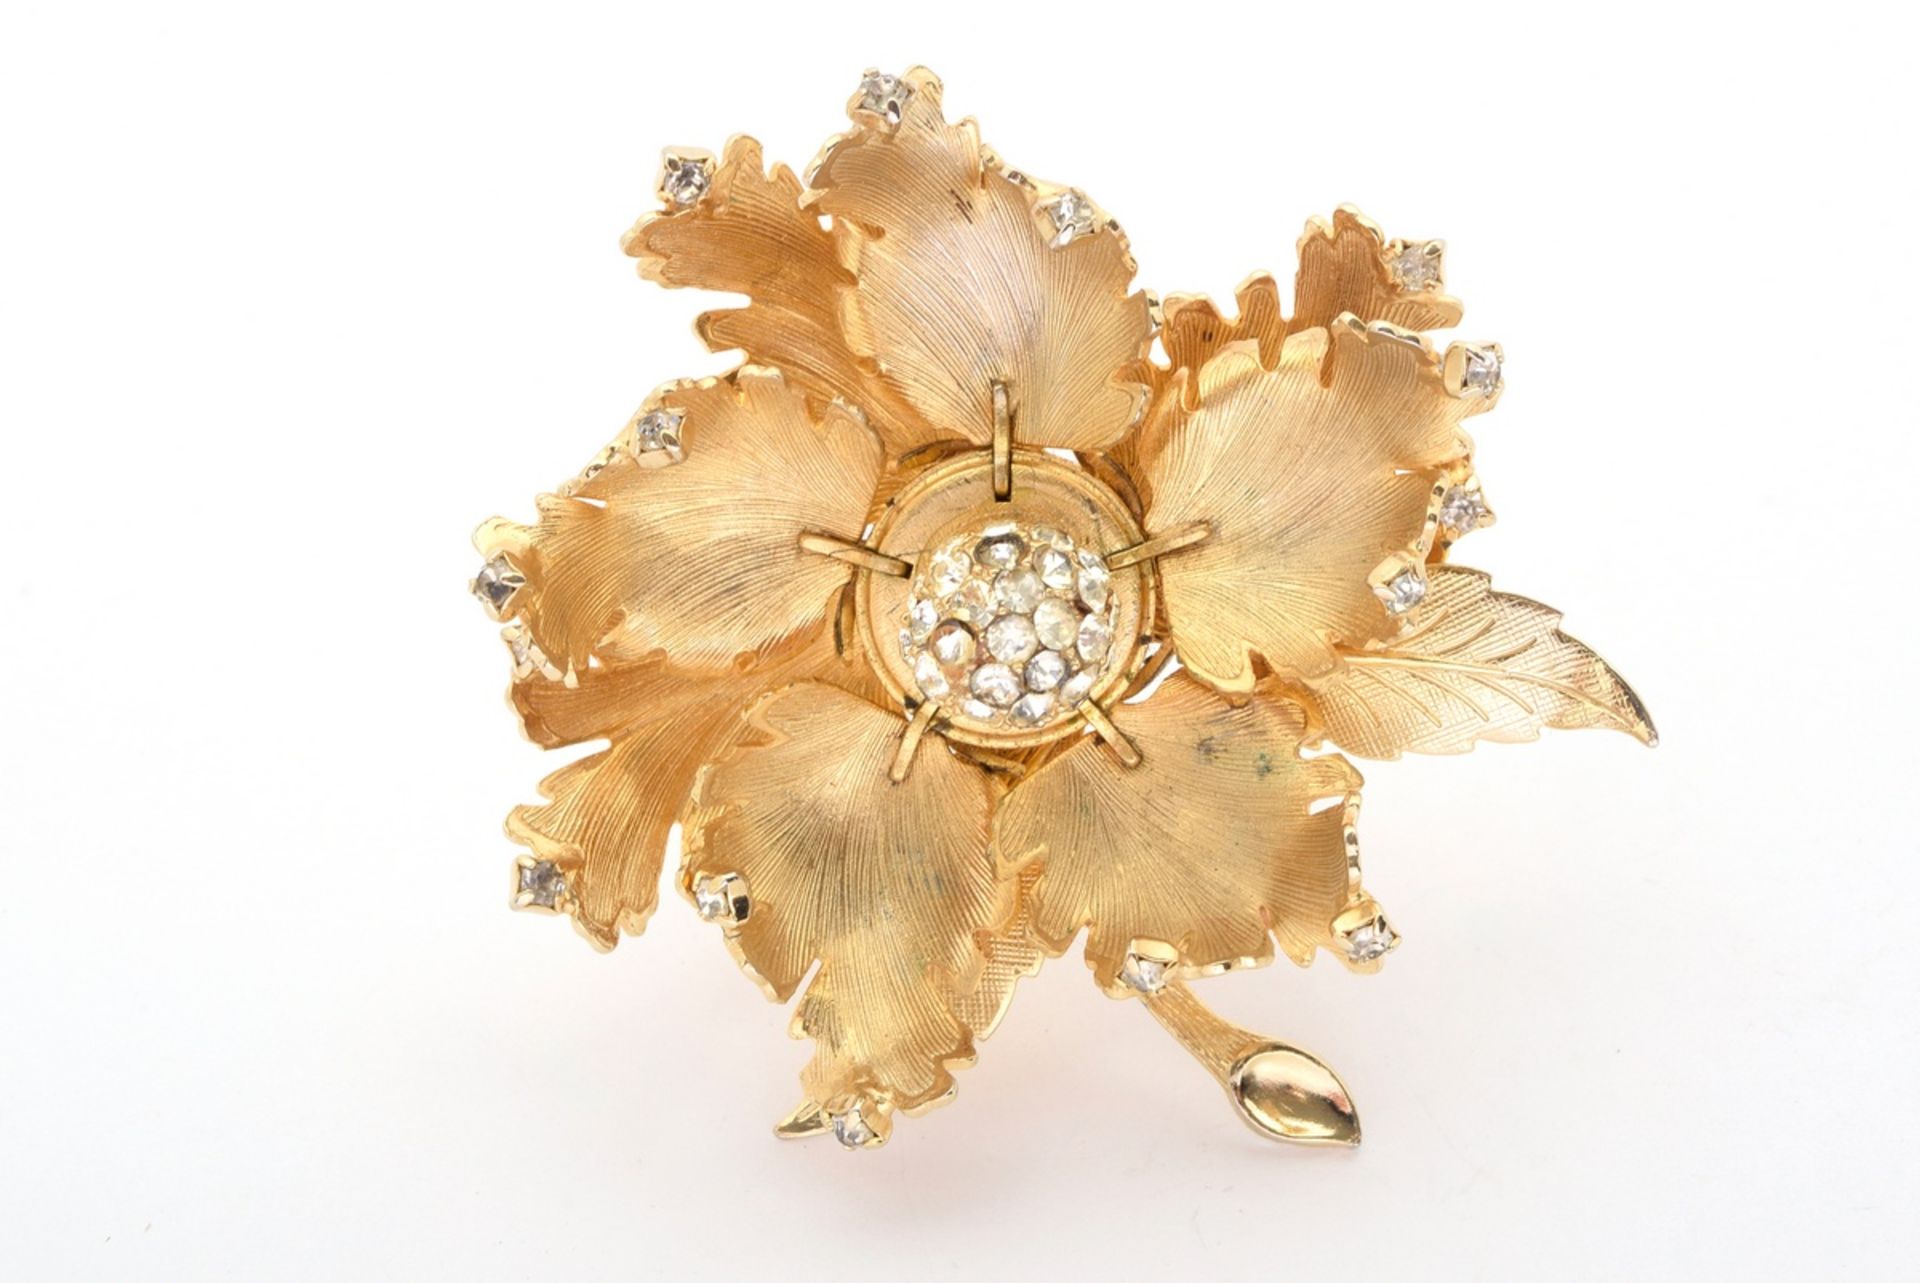 Large gilt flower pin with rhinestones, signed "Warner, New York", l. 6.5cm - Image 2 of 3